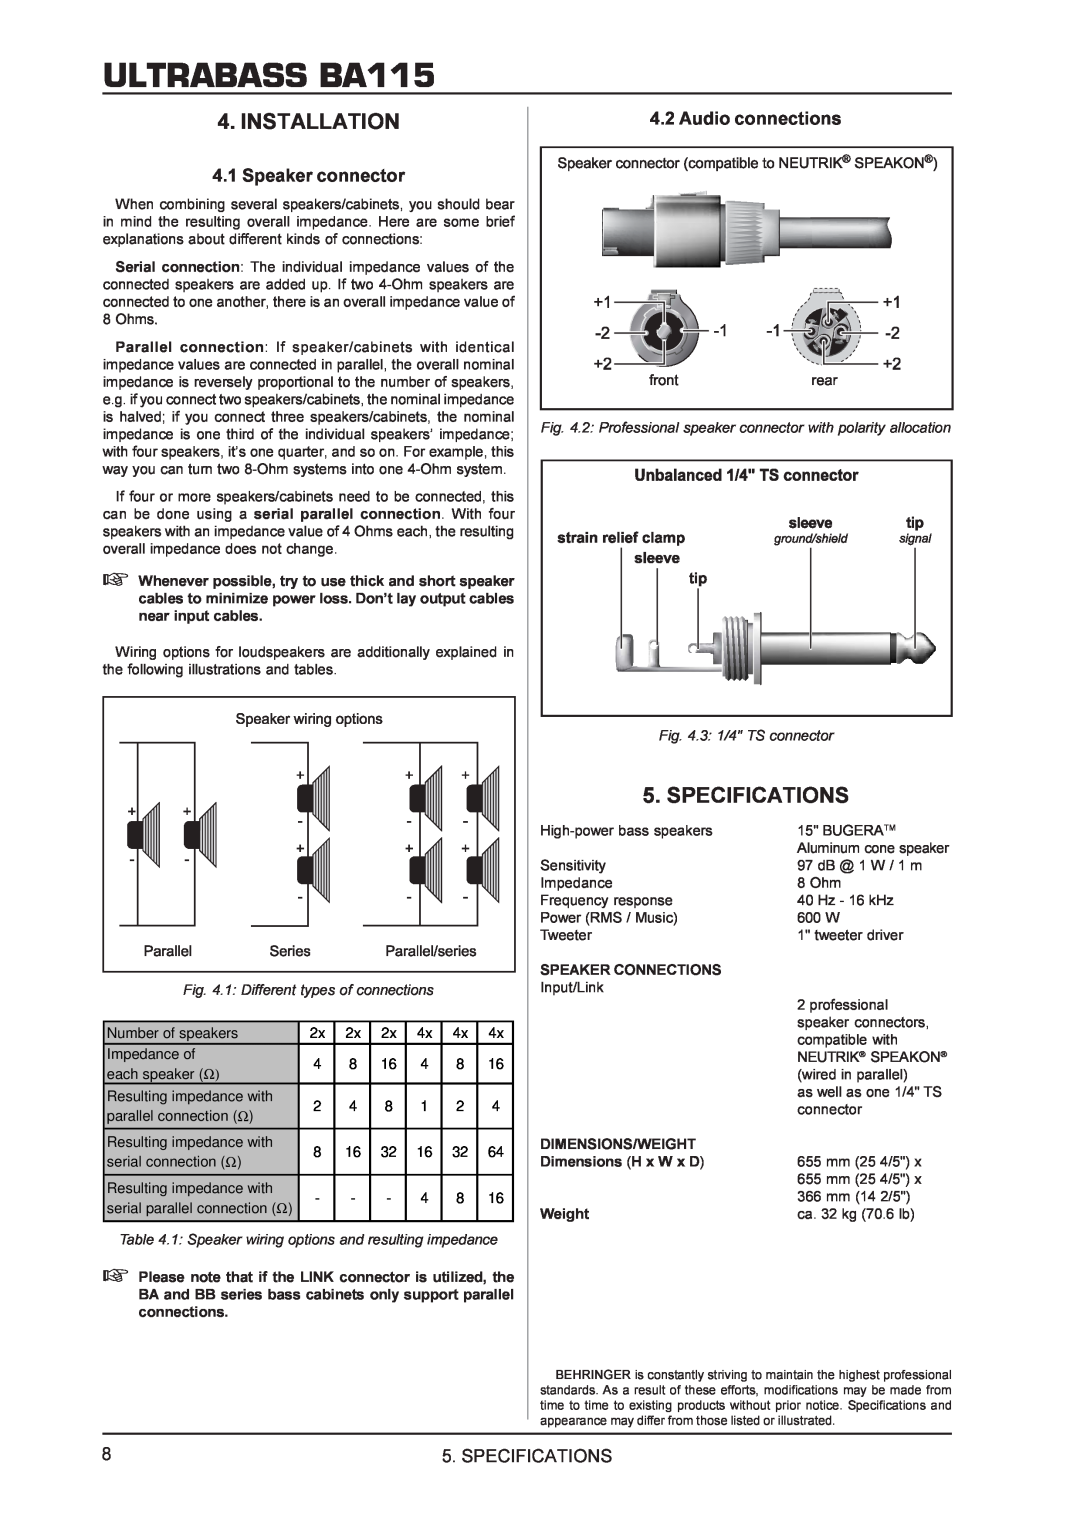 Behringer manual Installation, Specifications, ULTRABASS BA115, 1 Different types of connections, 3 1/4 TS connector 